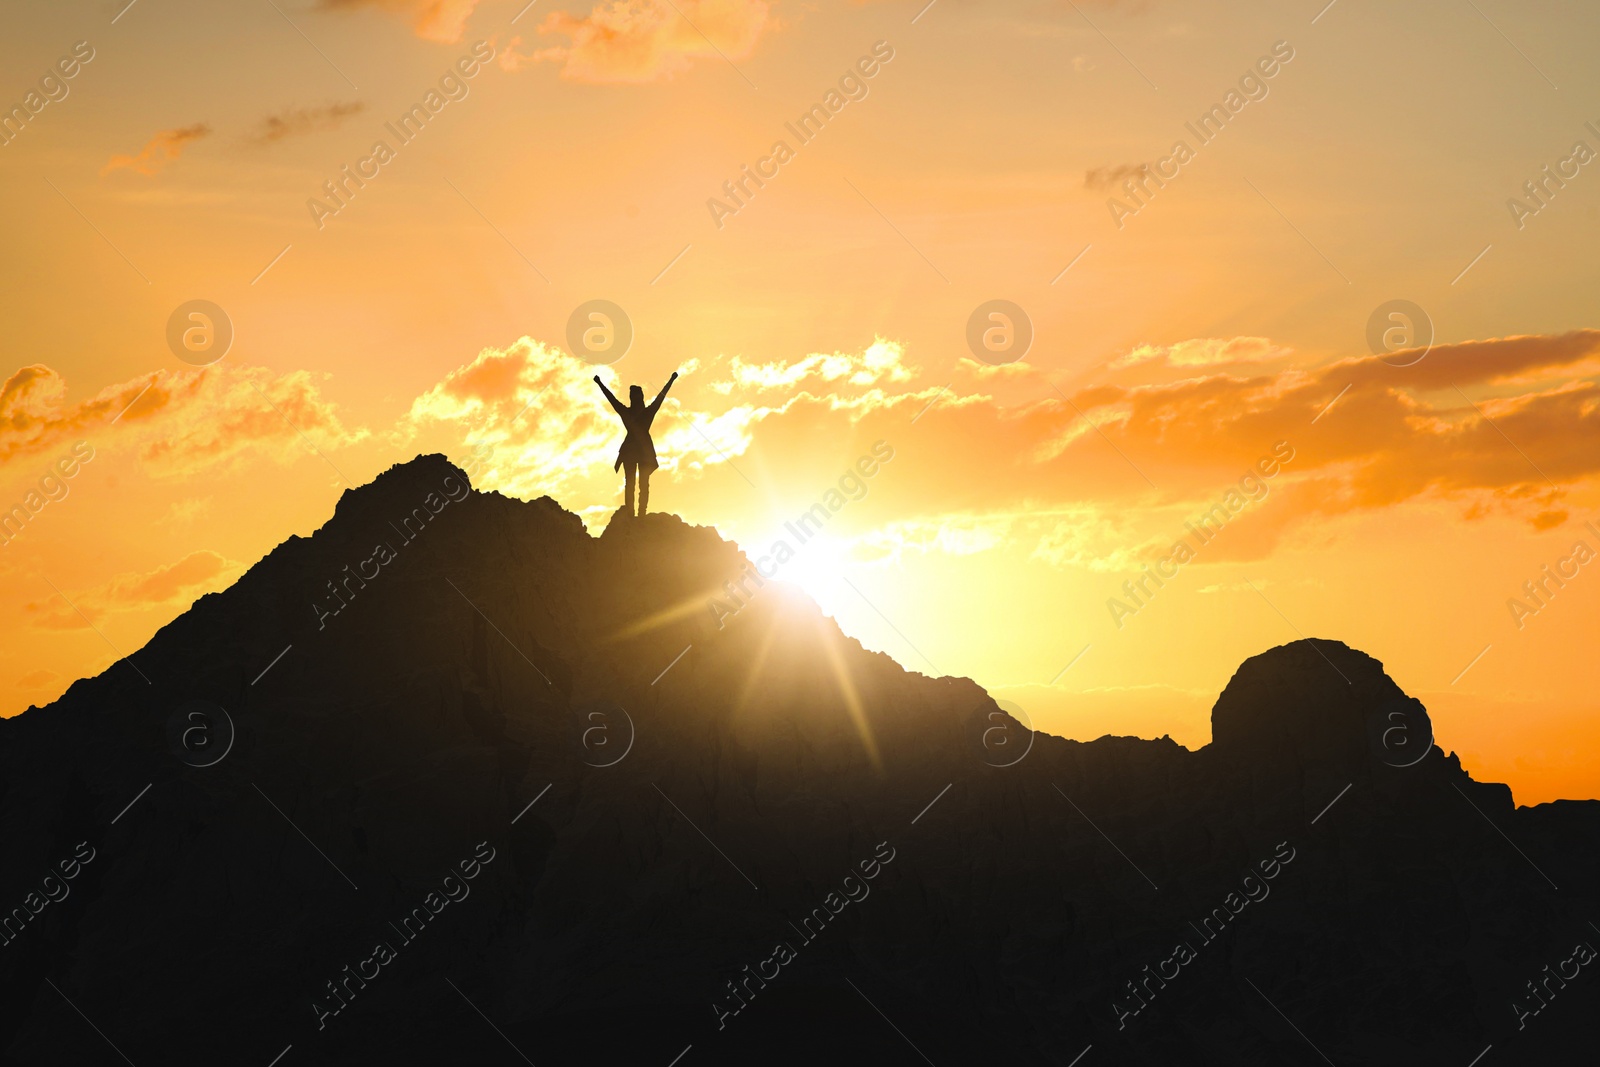 Image of Silhouette of woman in mountains under beautiful sky at sunset